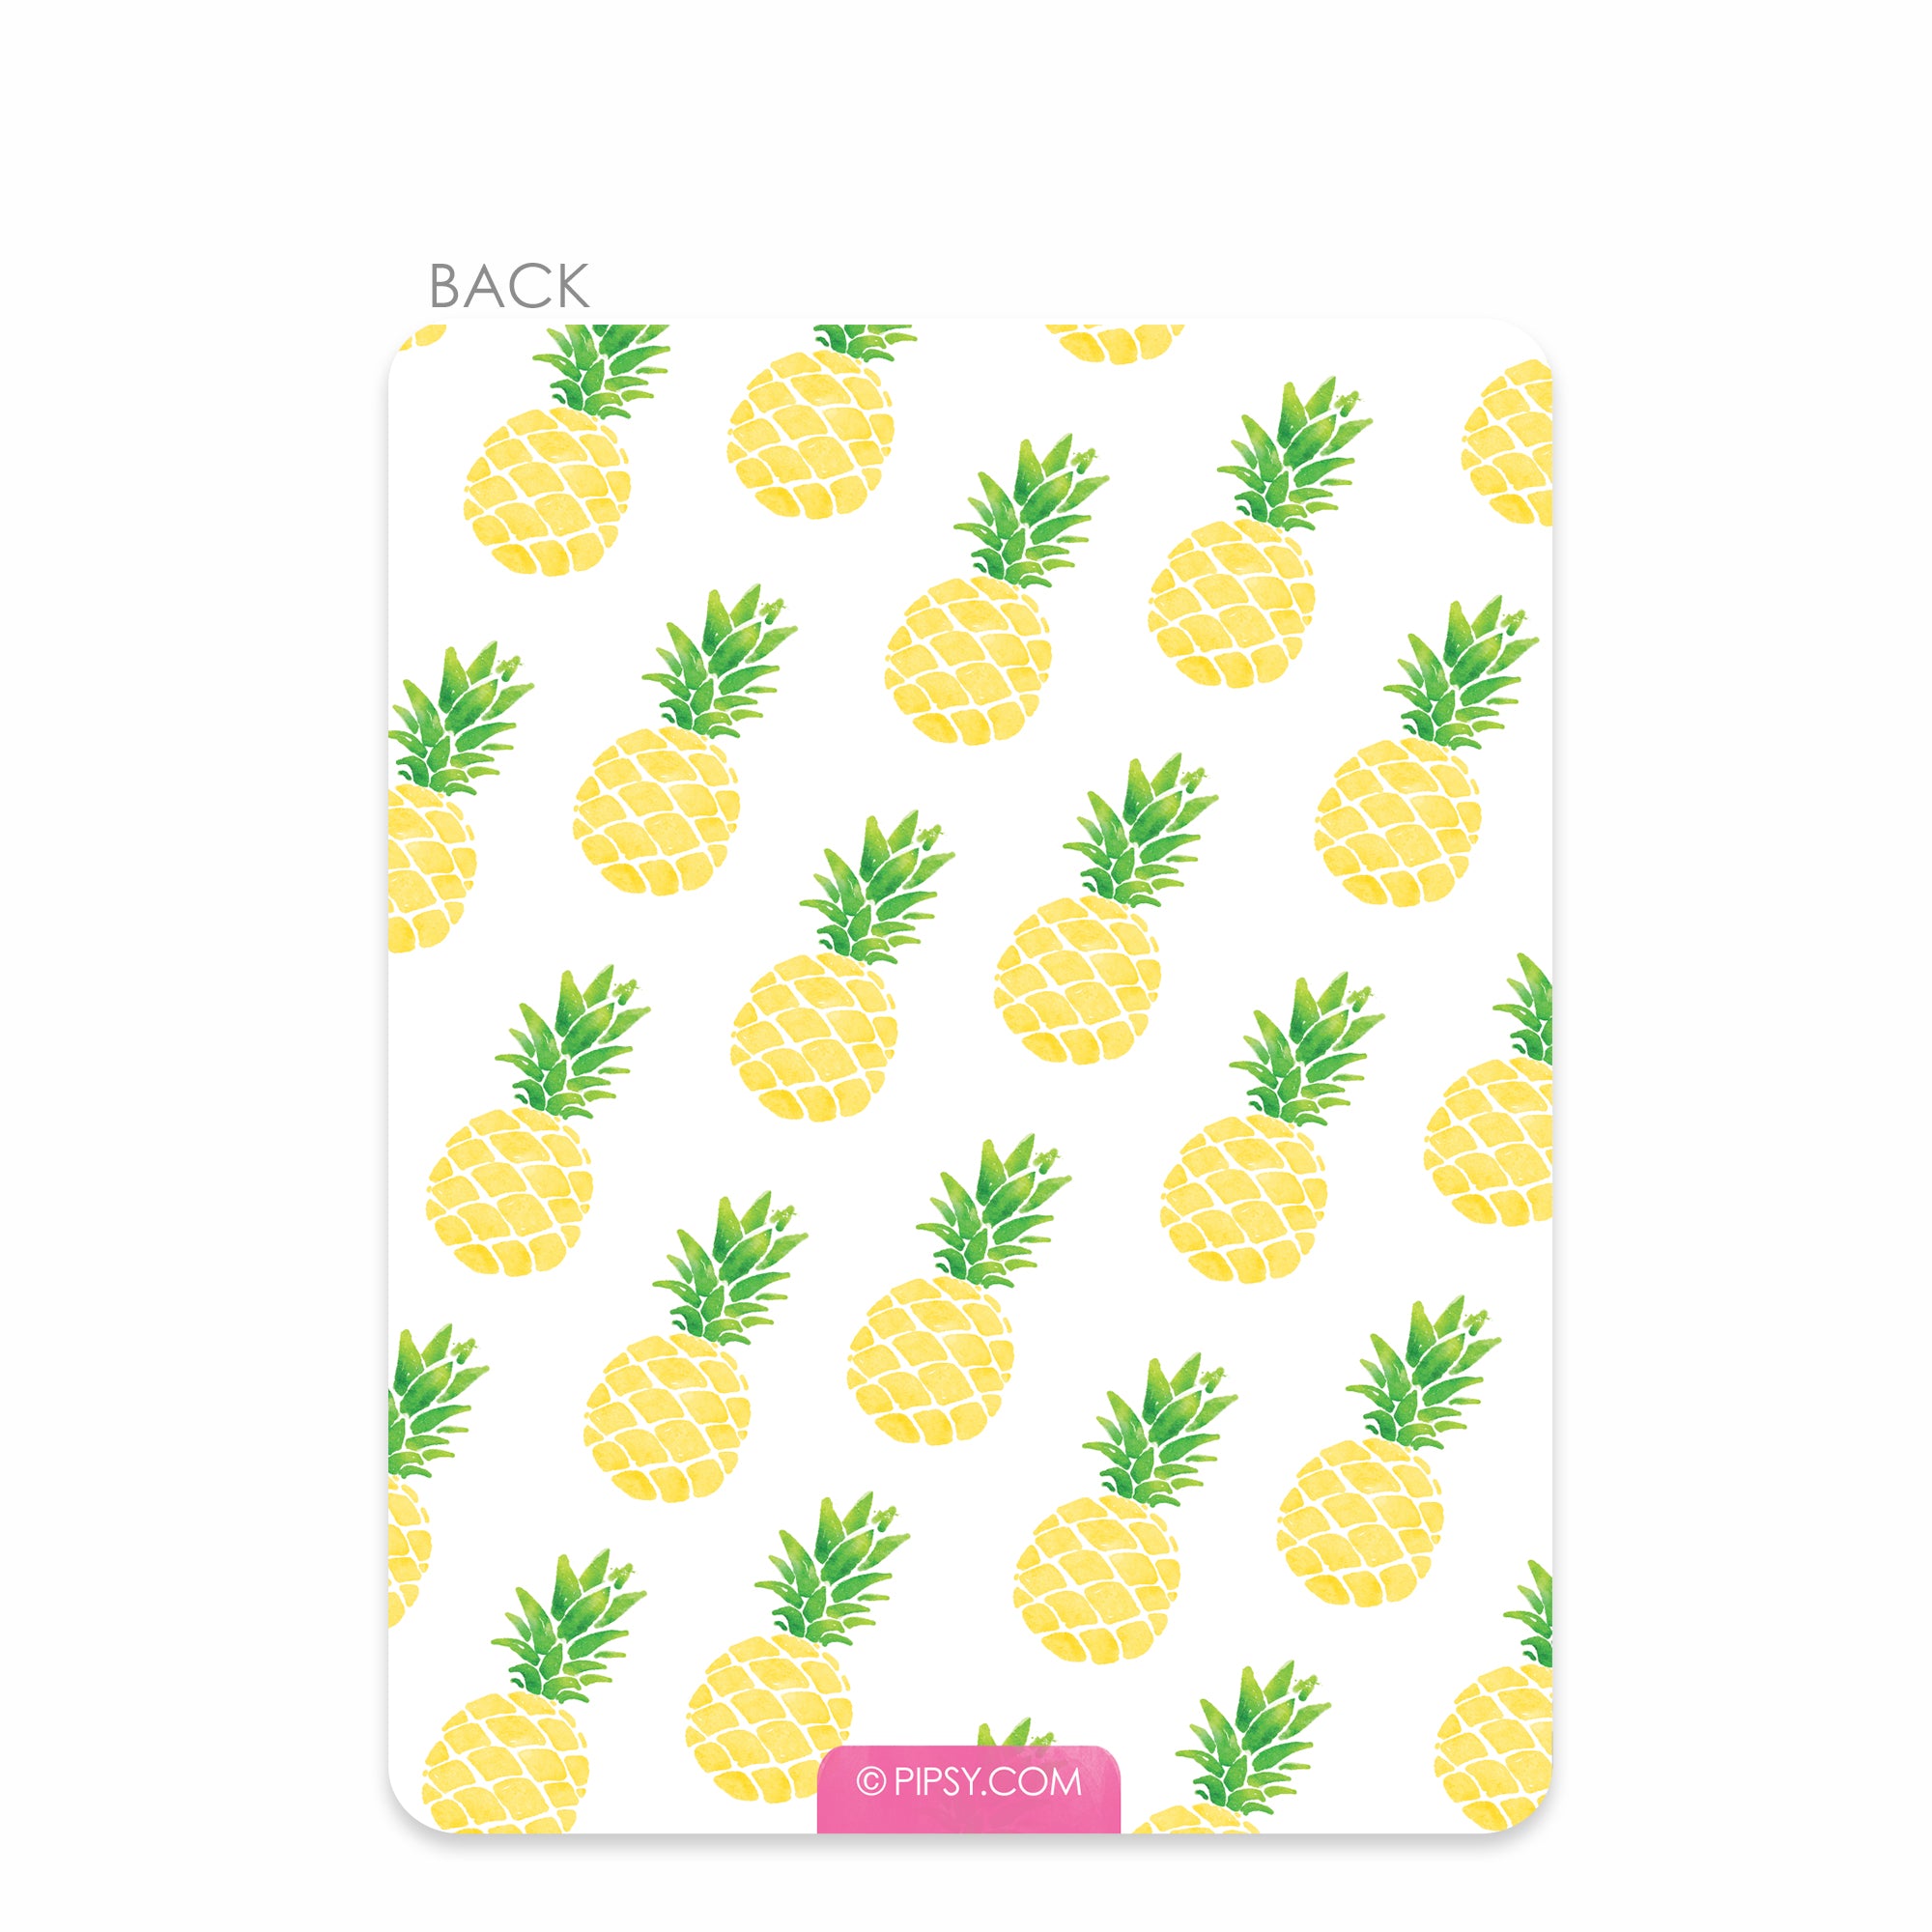 Pineapple thank you notecard stationery, back view